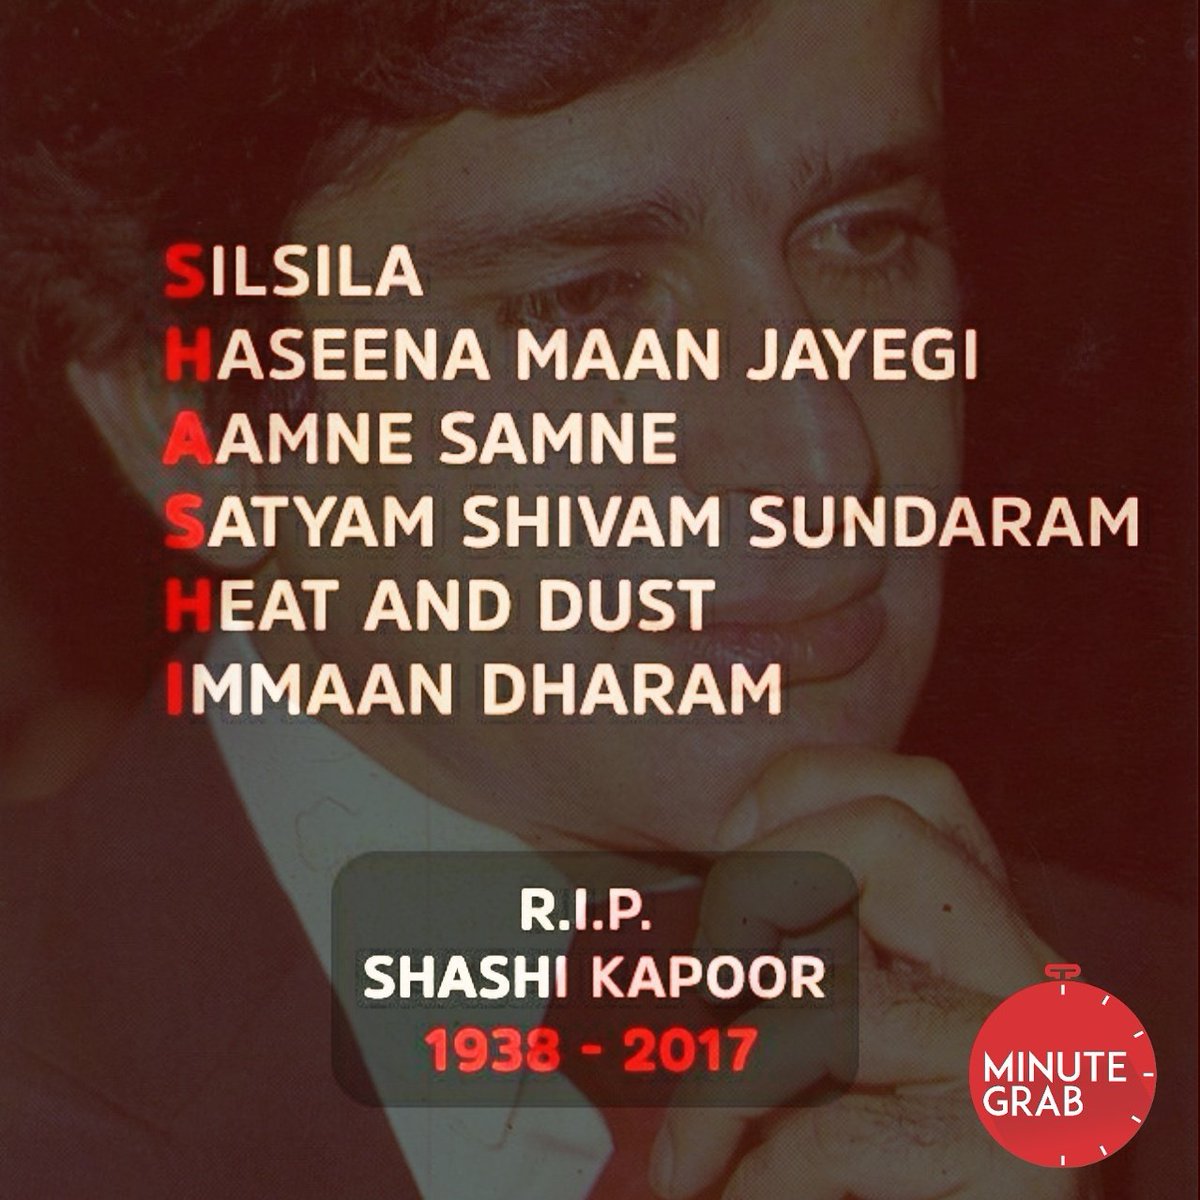 Some people never die... They are always there in your heart.

Follow @thedesibook 
.
.
.
.
#SahshiKapoor #shashi #amithabhbachchan #actor #veteran #bollywood #merepasmaahai #viral #trending  #humor #dekhi #tollywood #hollywood #filmy #film #movie #kapoor #srk #lfl #demise